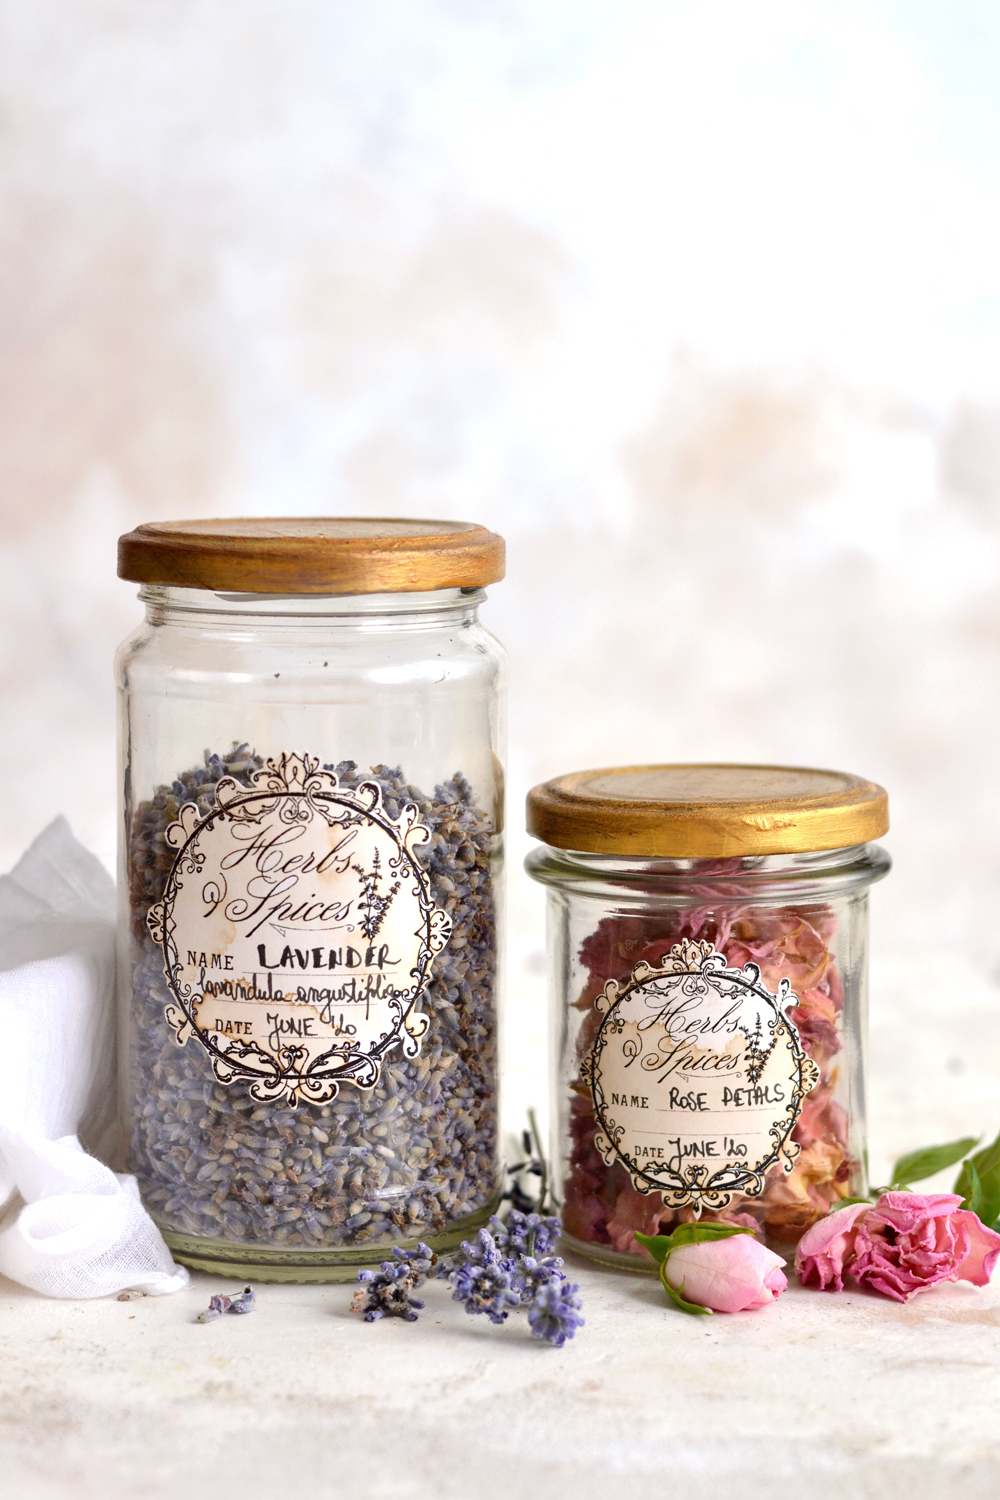 DIY Herbs and Spices Apothecary Jars